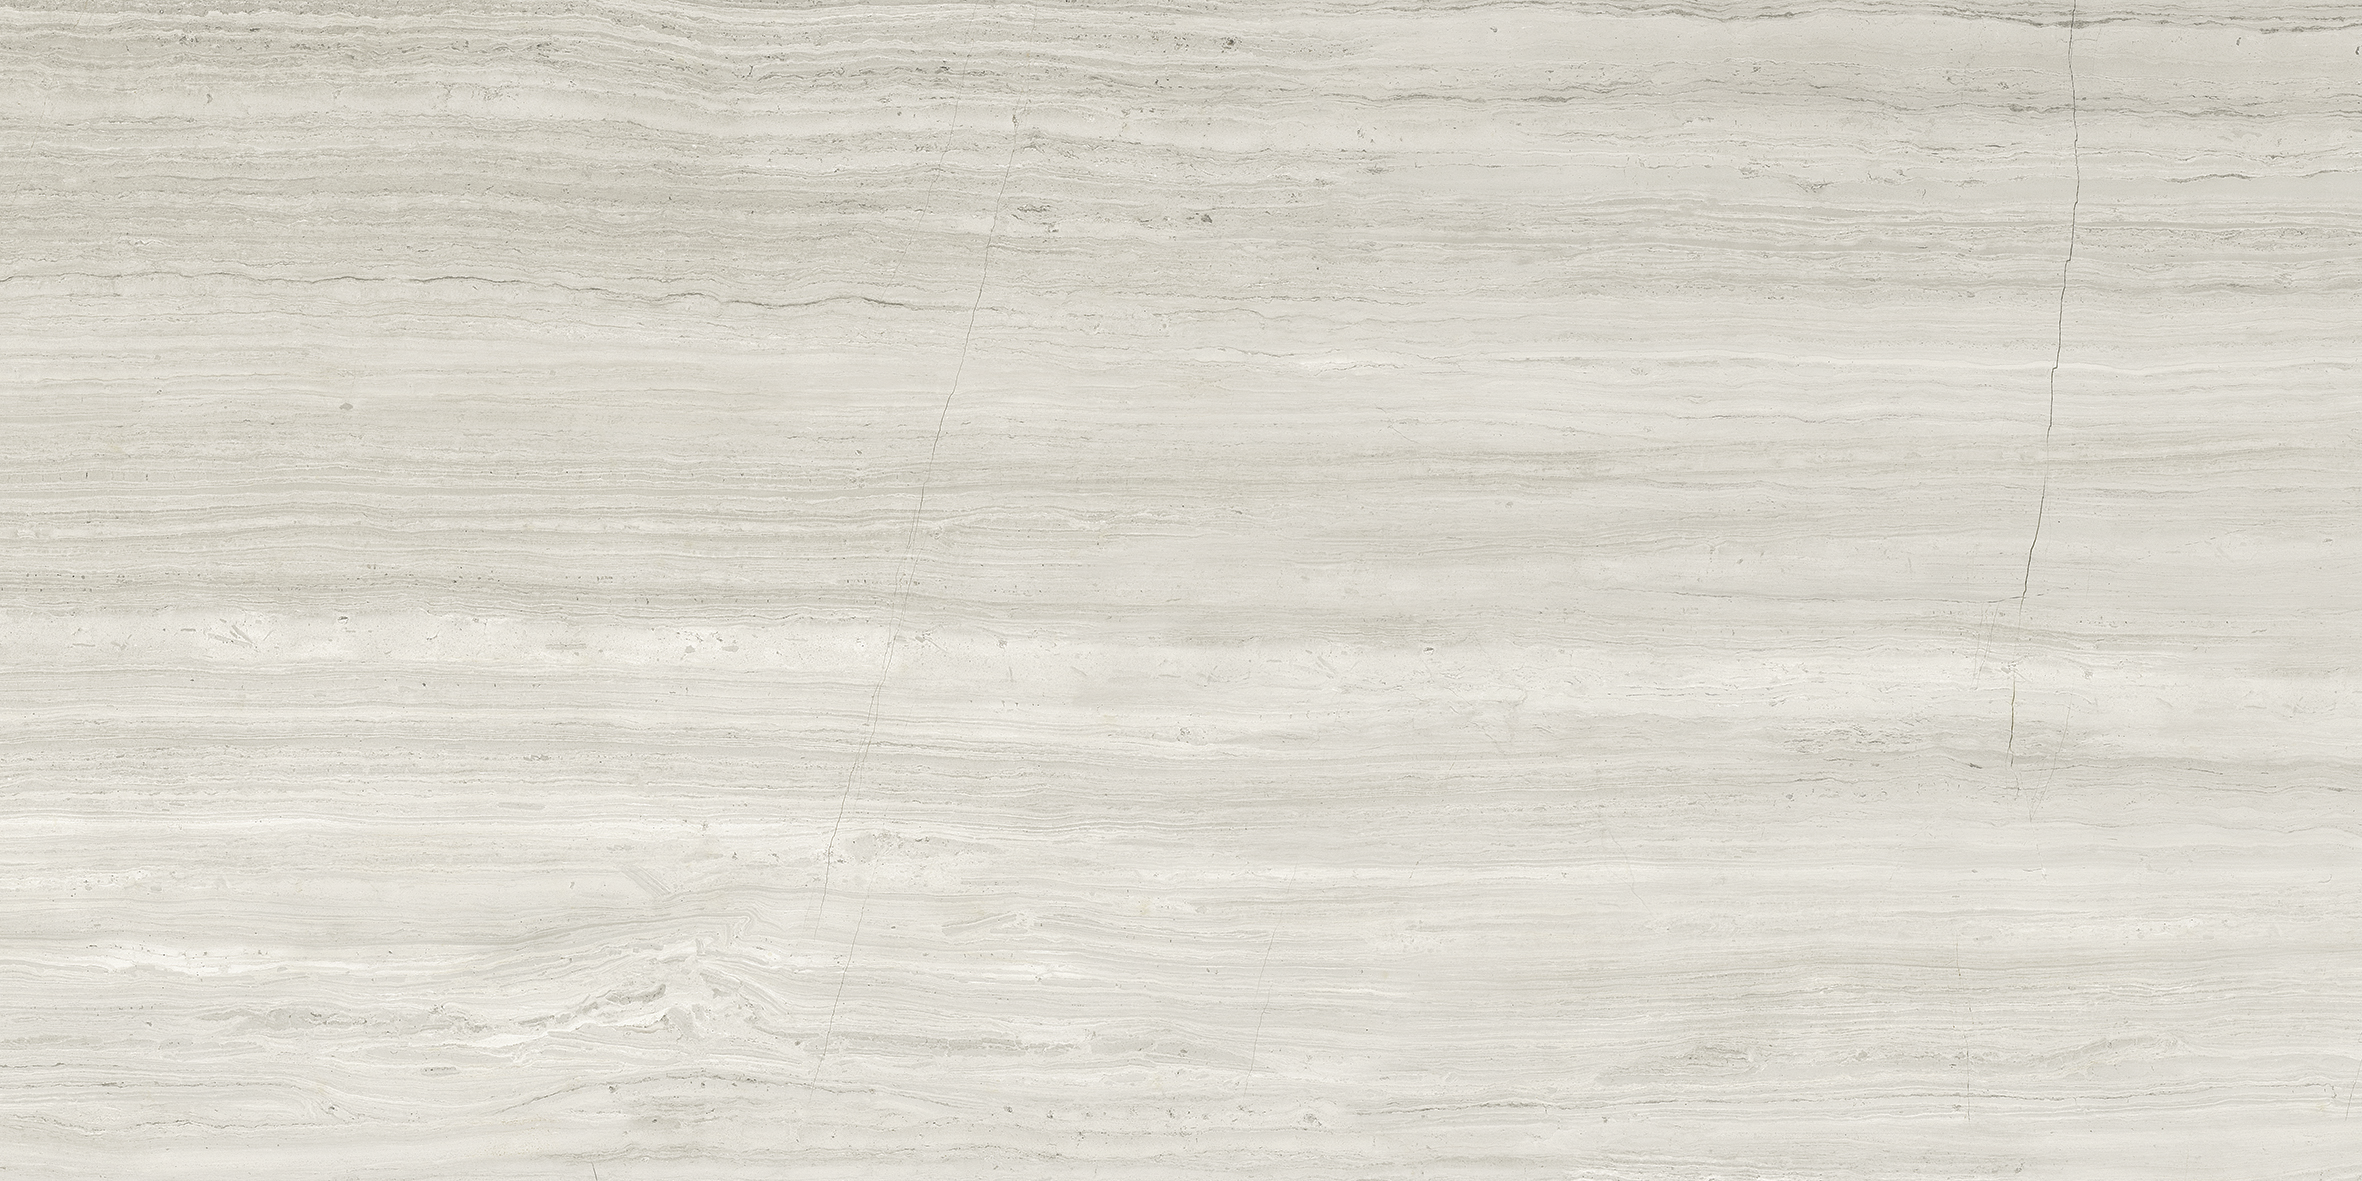 strada ash pattern glazed porcelain field tile from mayfair anatolia collection distributed by surface group international matte finish rectified edge 12x24 rectangle shape